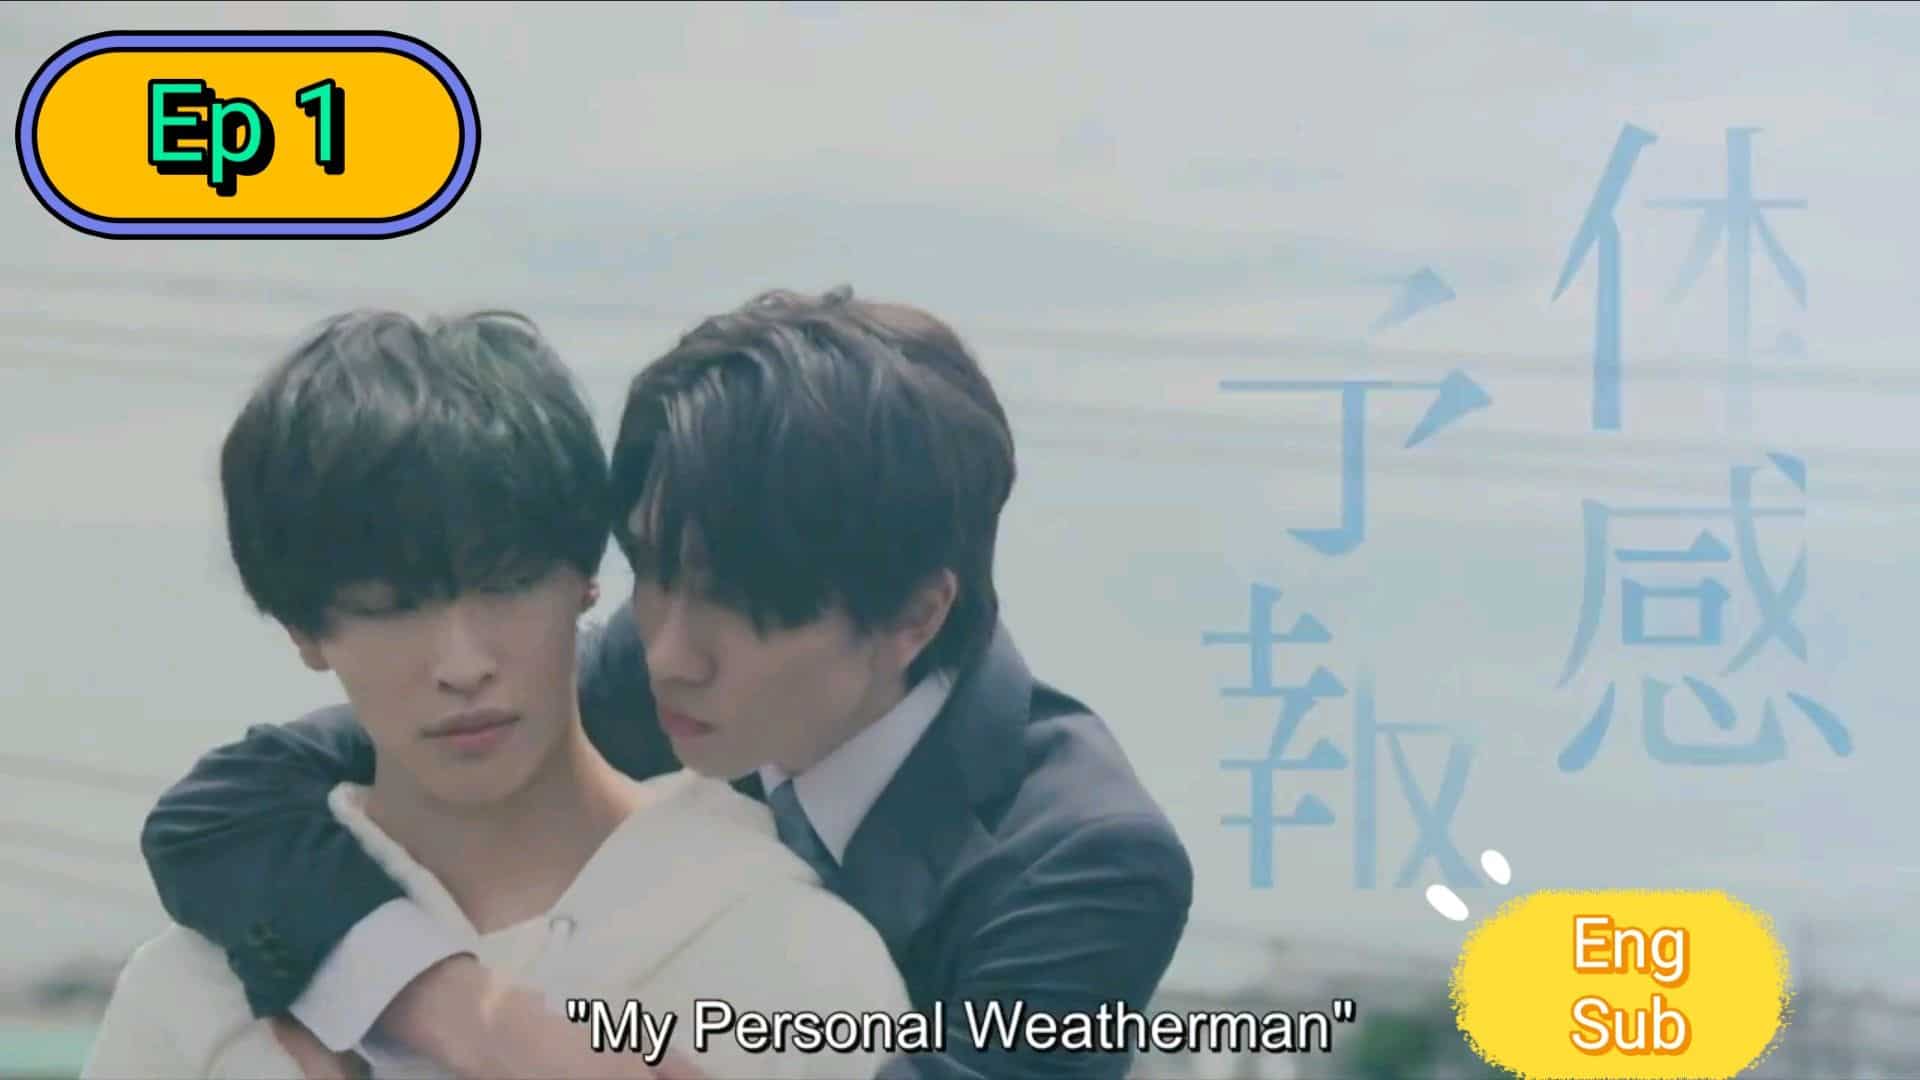 My Personal Weatherman Episode 6: Release Date, Preview and Streaming Guide